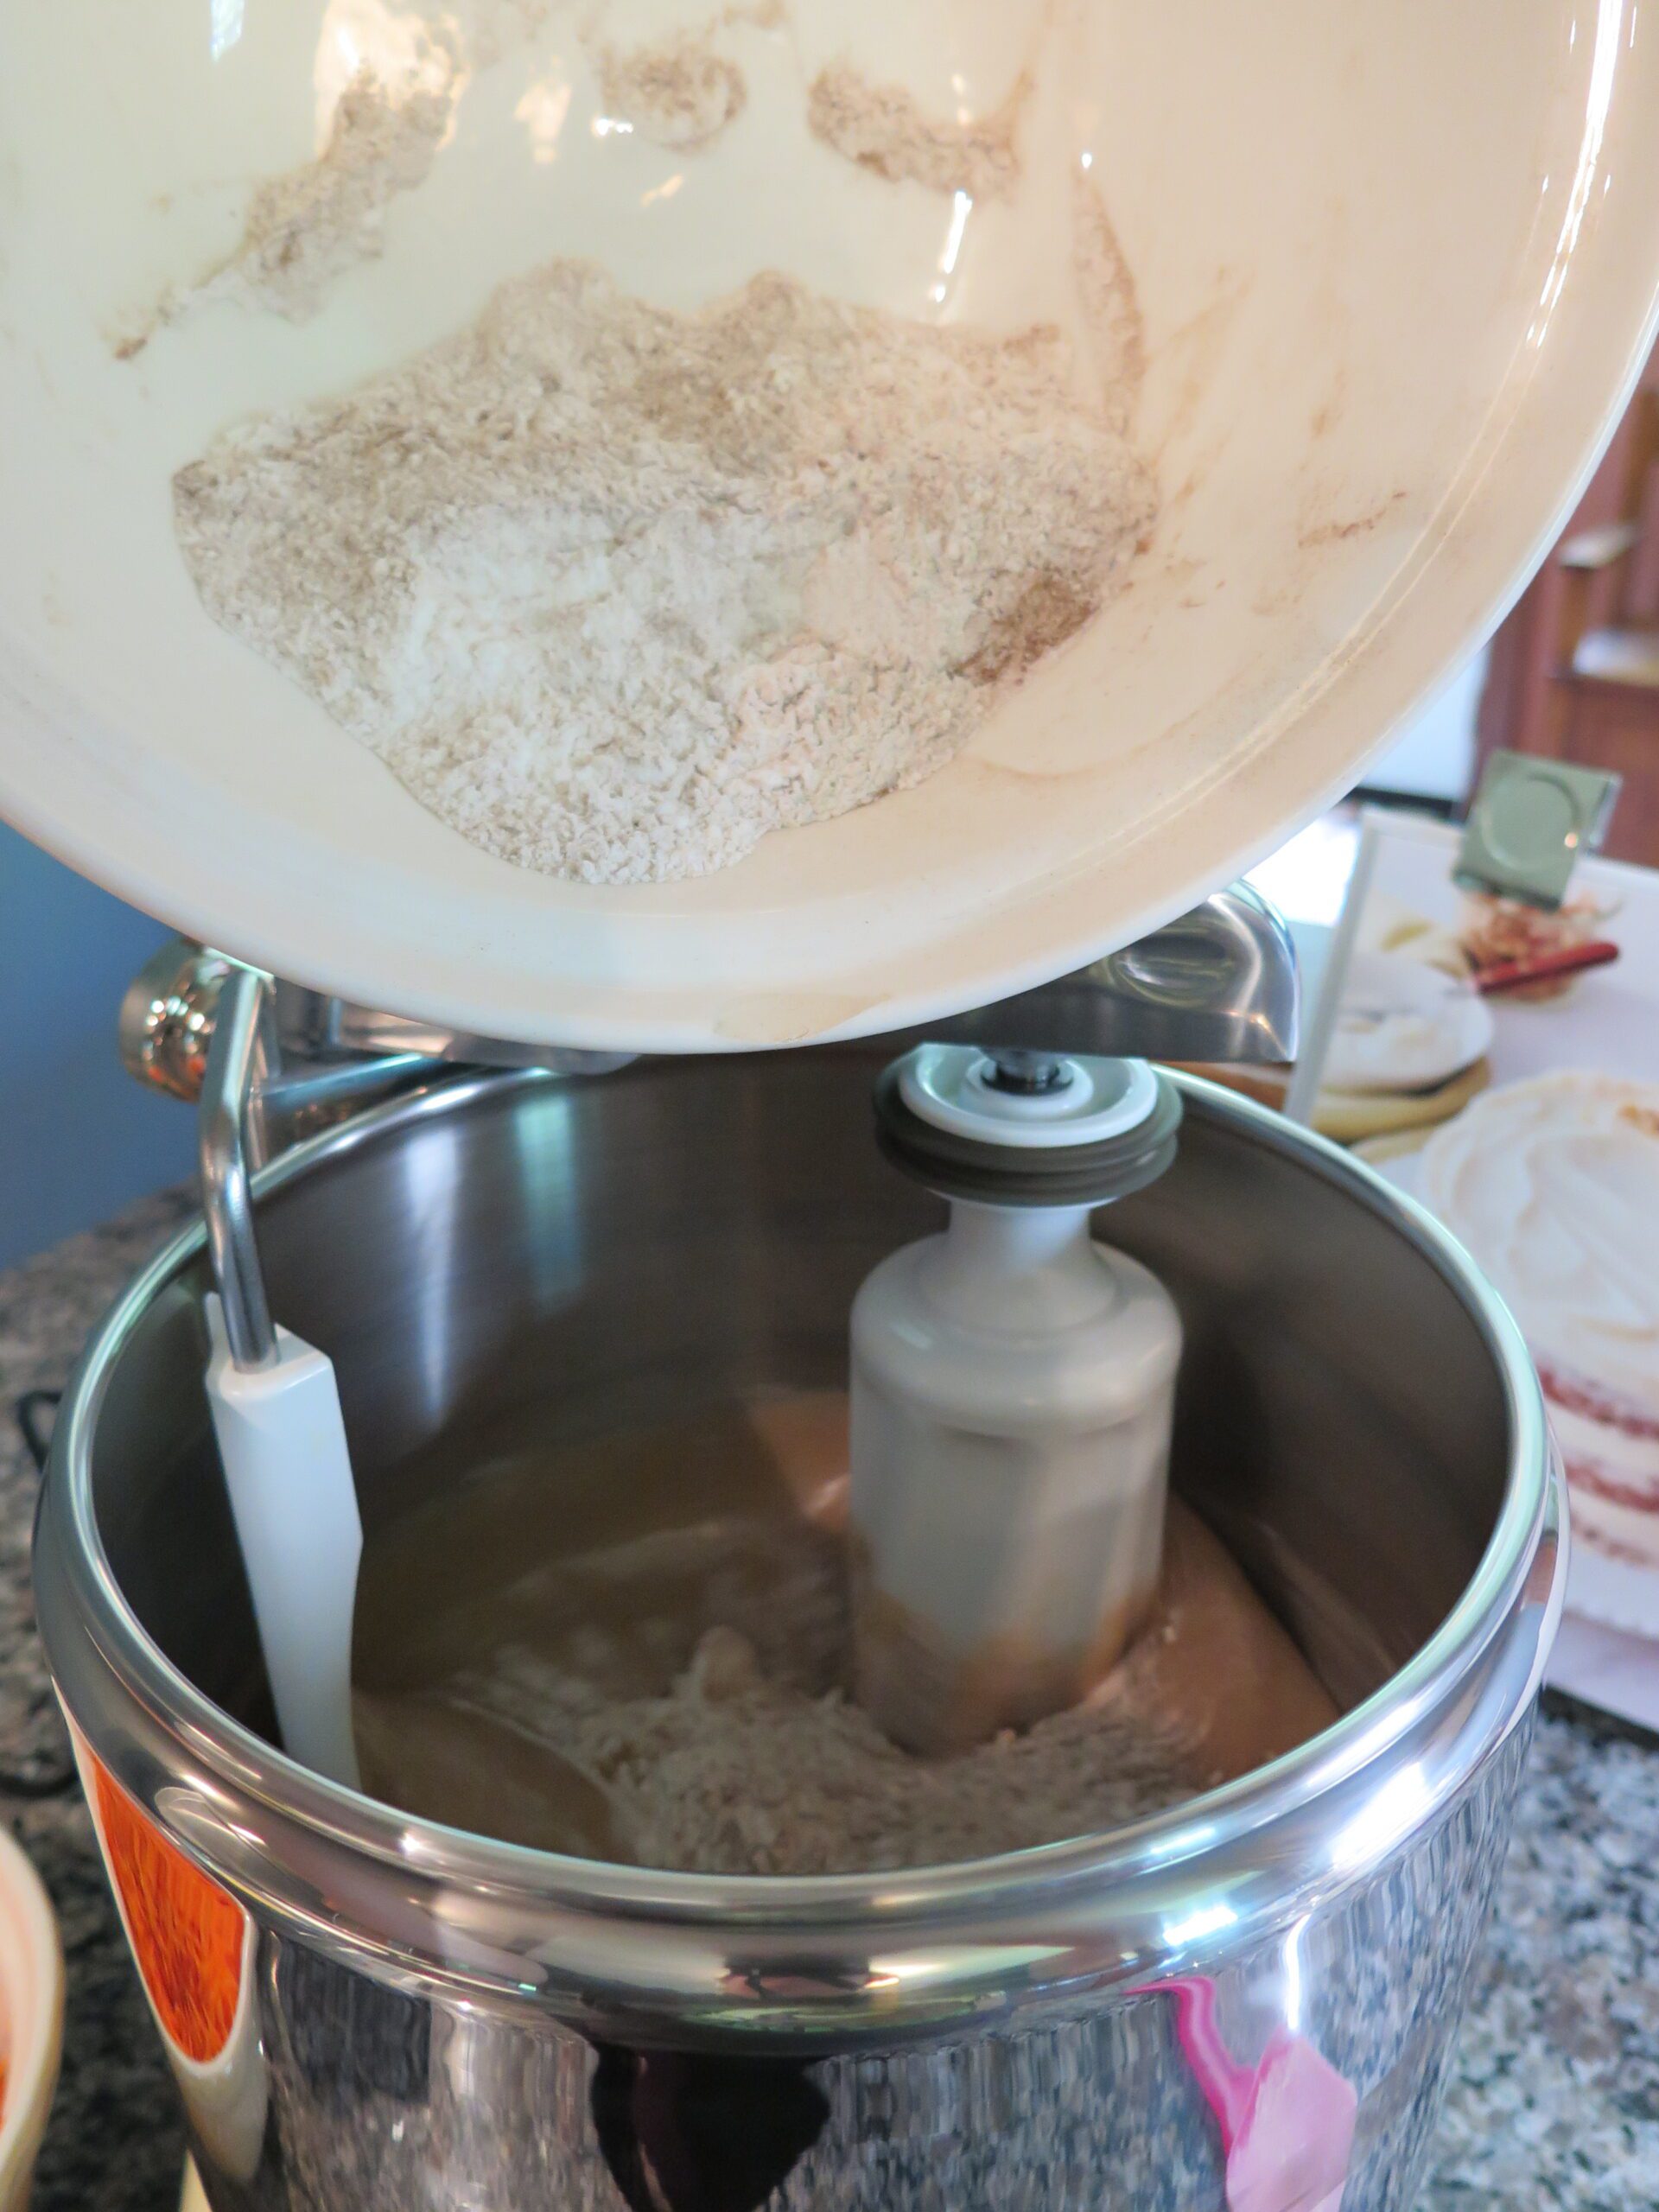 dry ingredients being added to wet